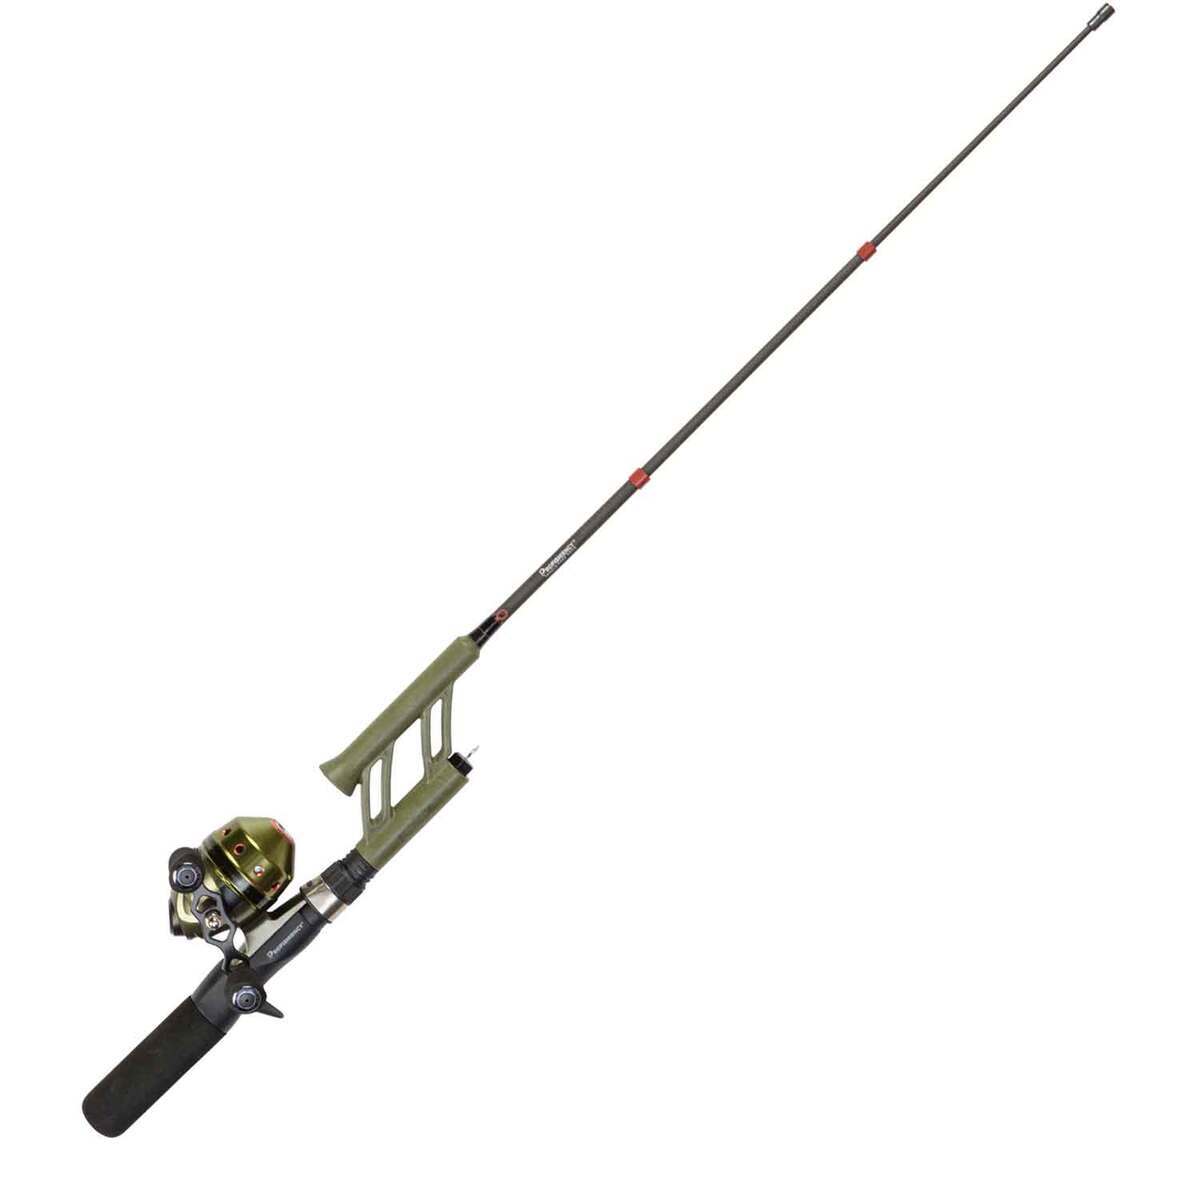 Profishiency Tiny But Mighty Pocket Spincast Rod And Reel, 52% OFF